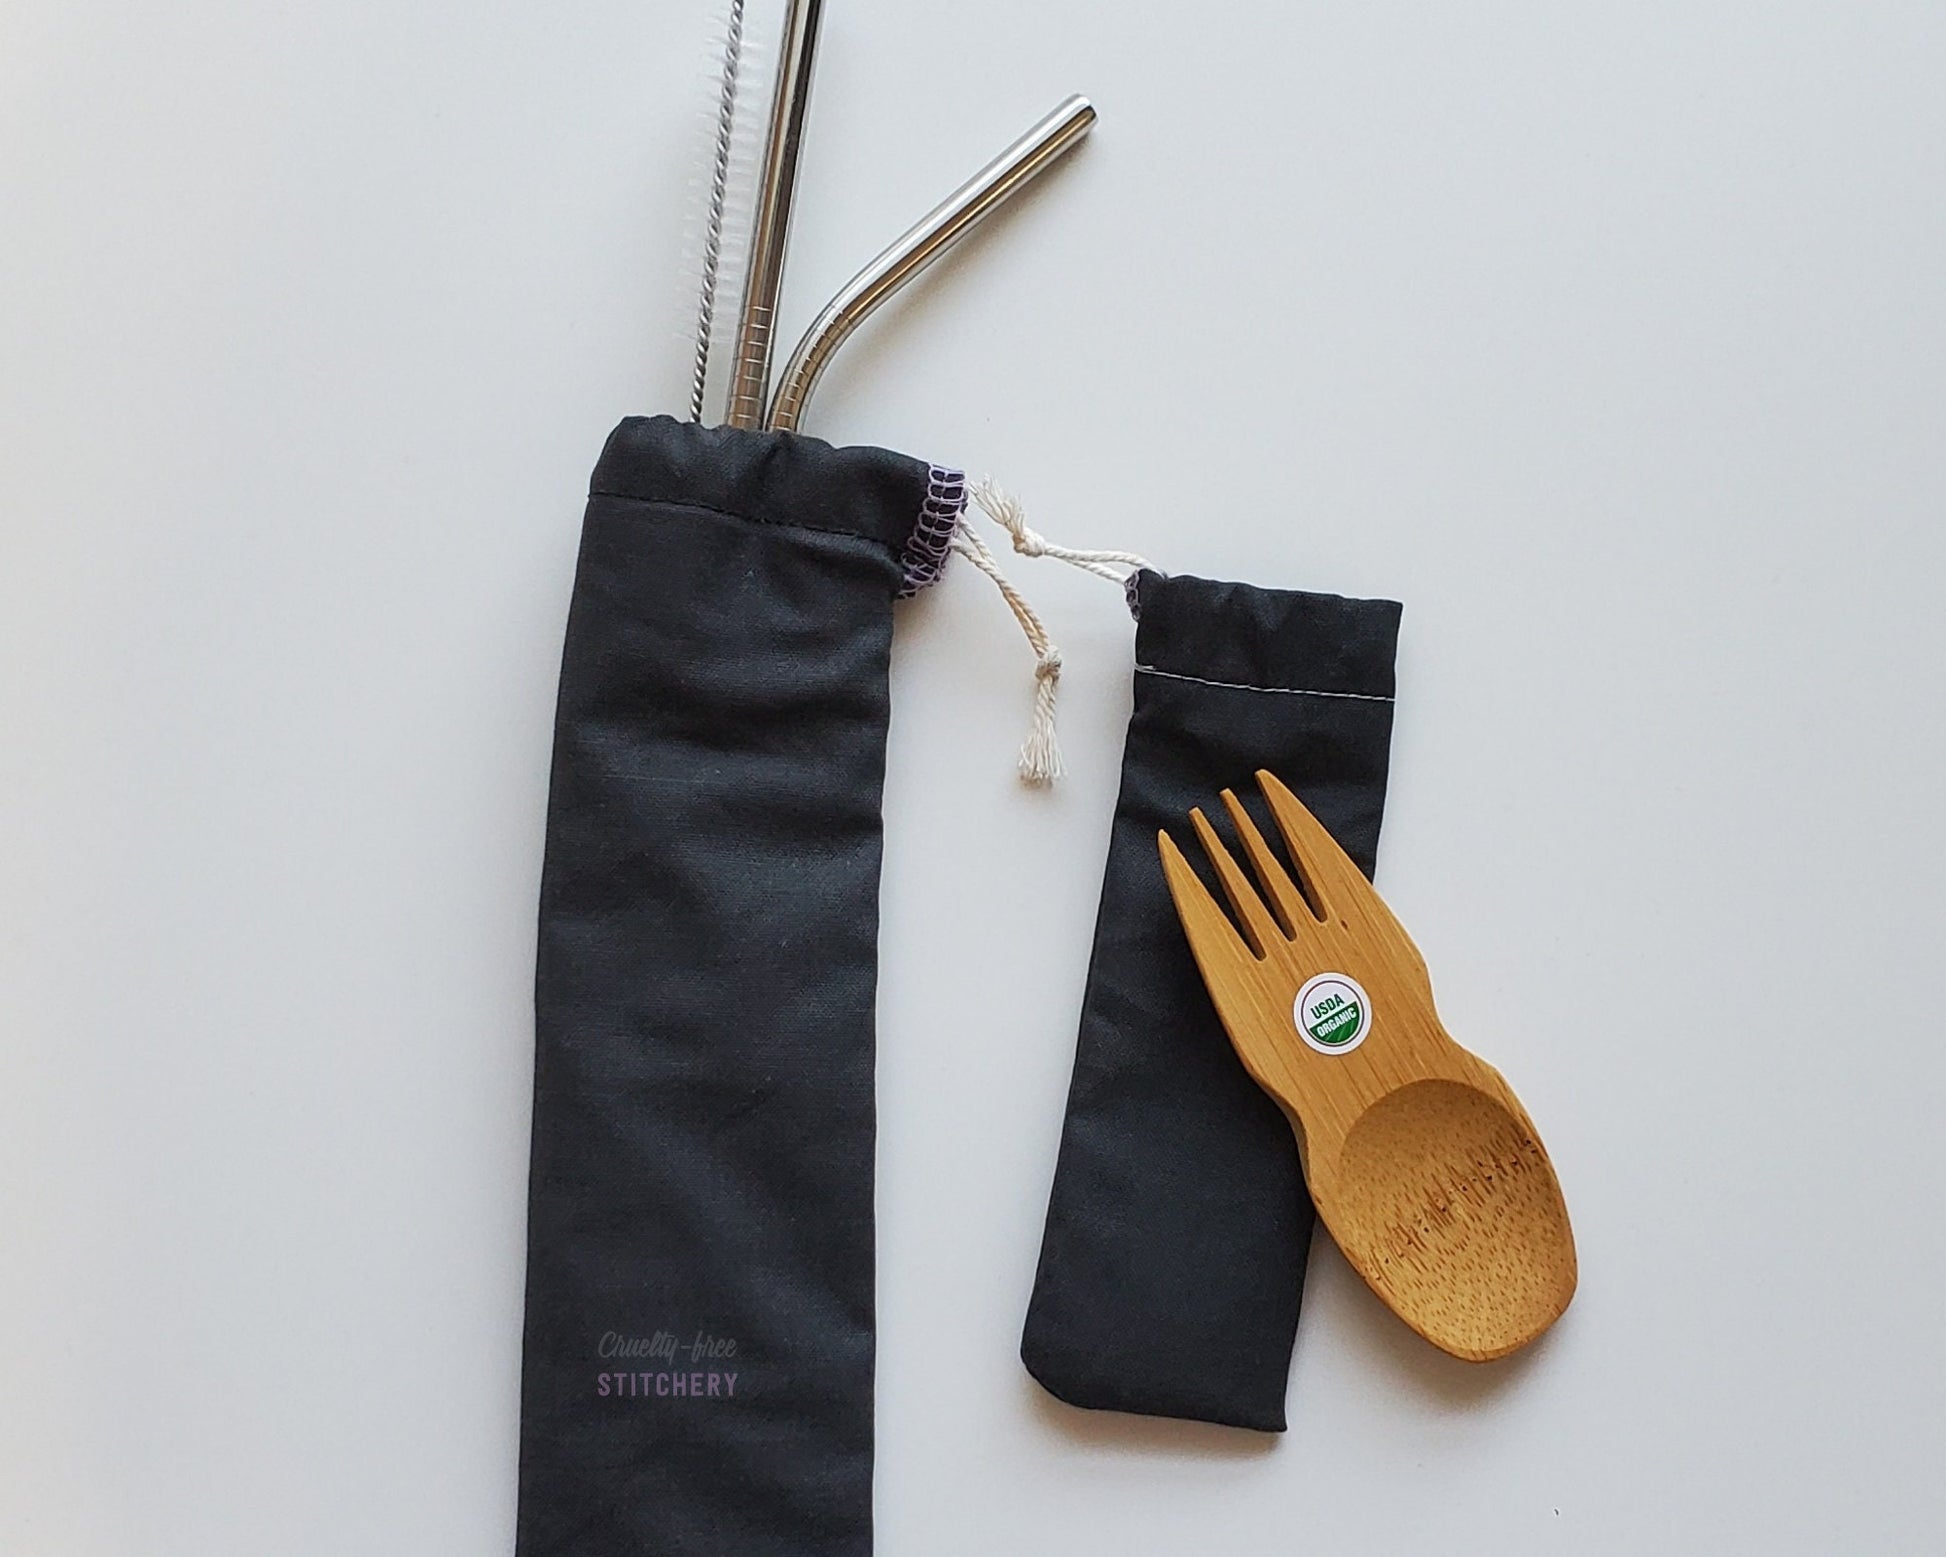 Reusable bamboo spork and stainless steel straw pouch set. The pouches are both solid black.